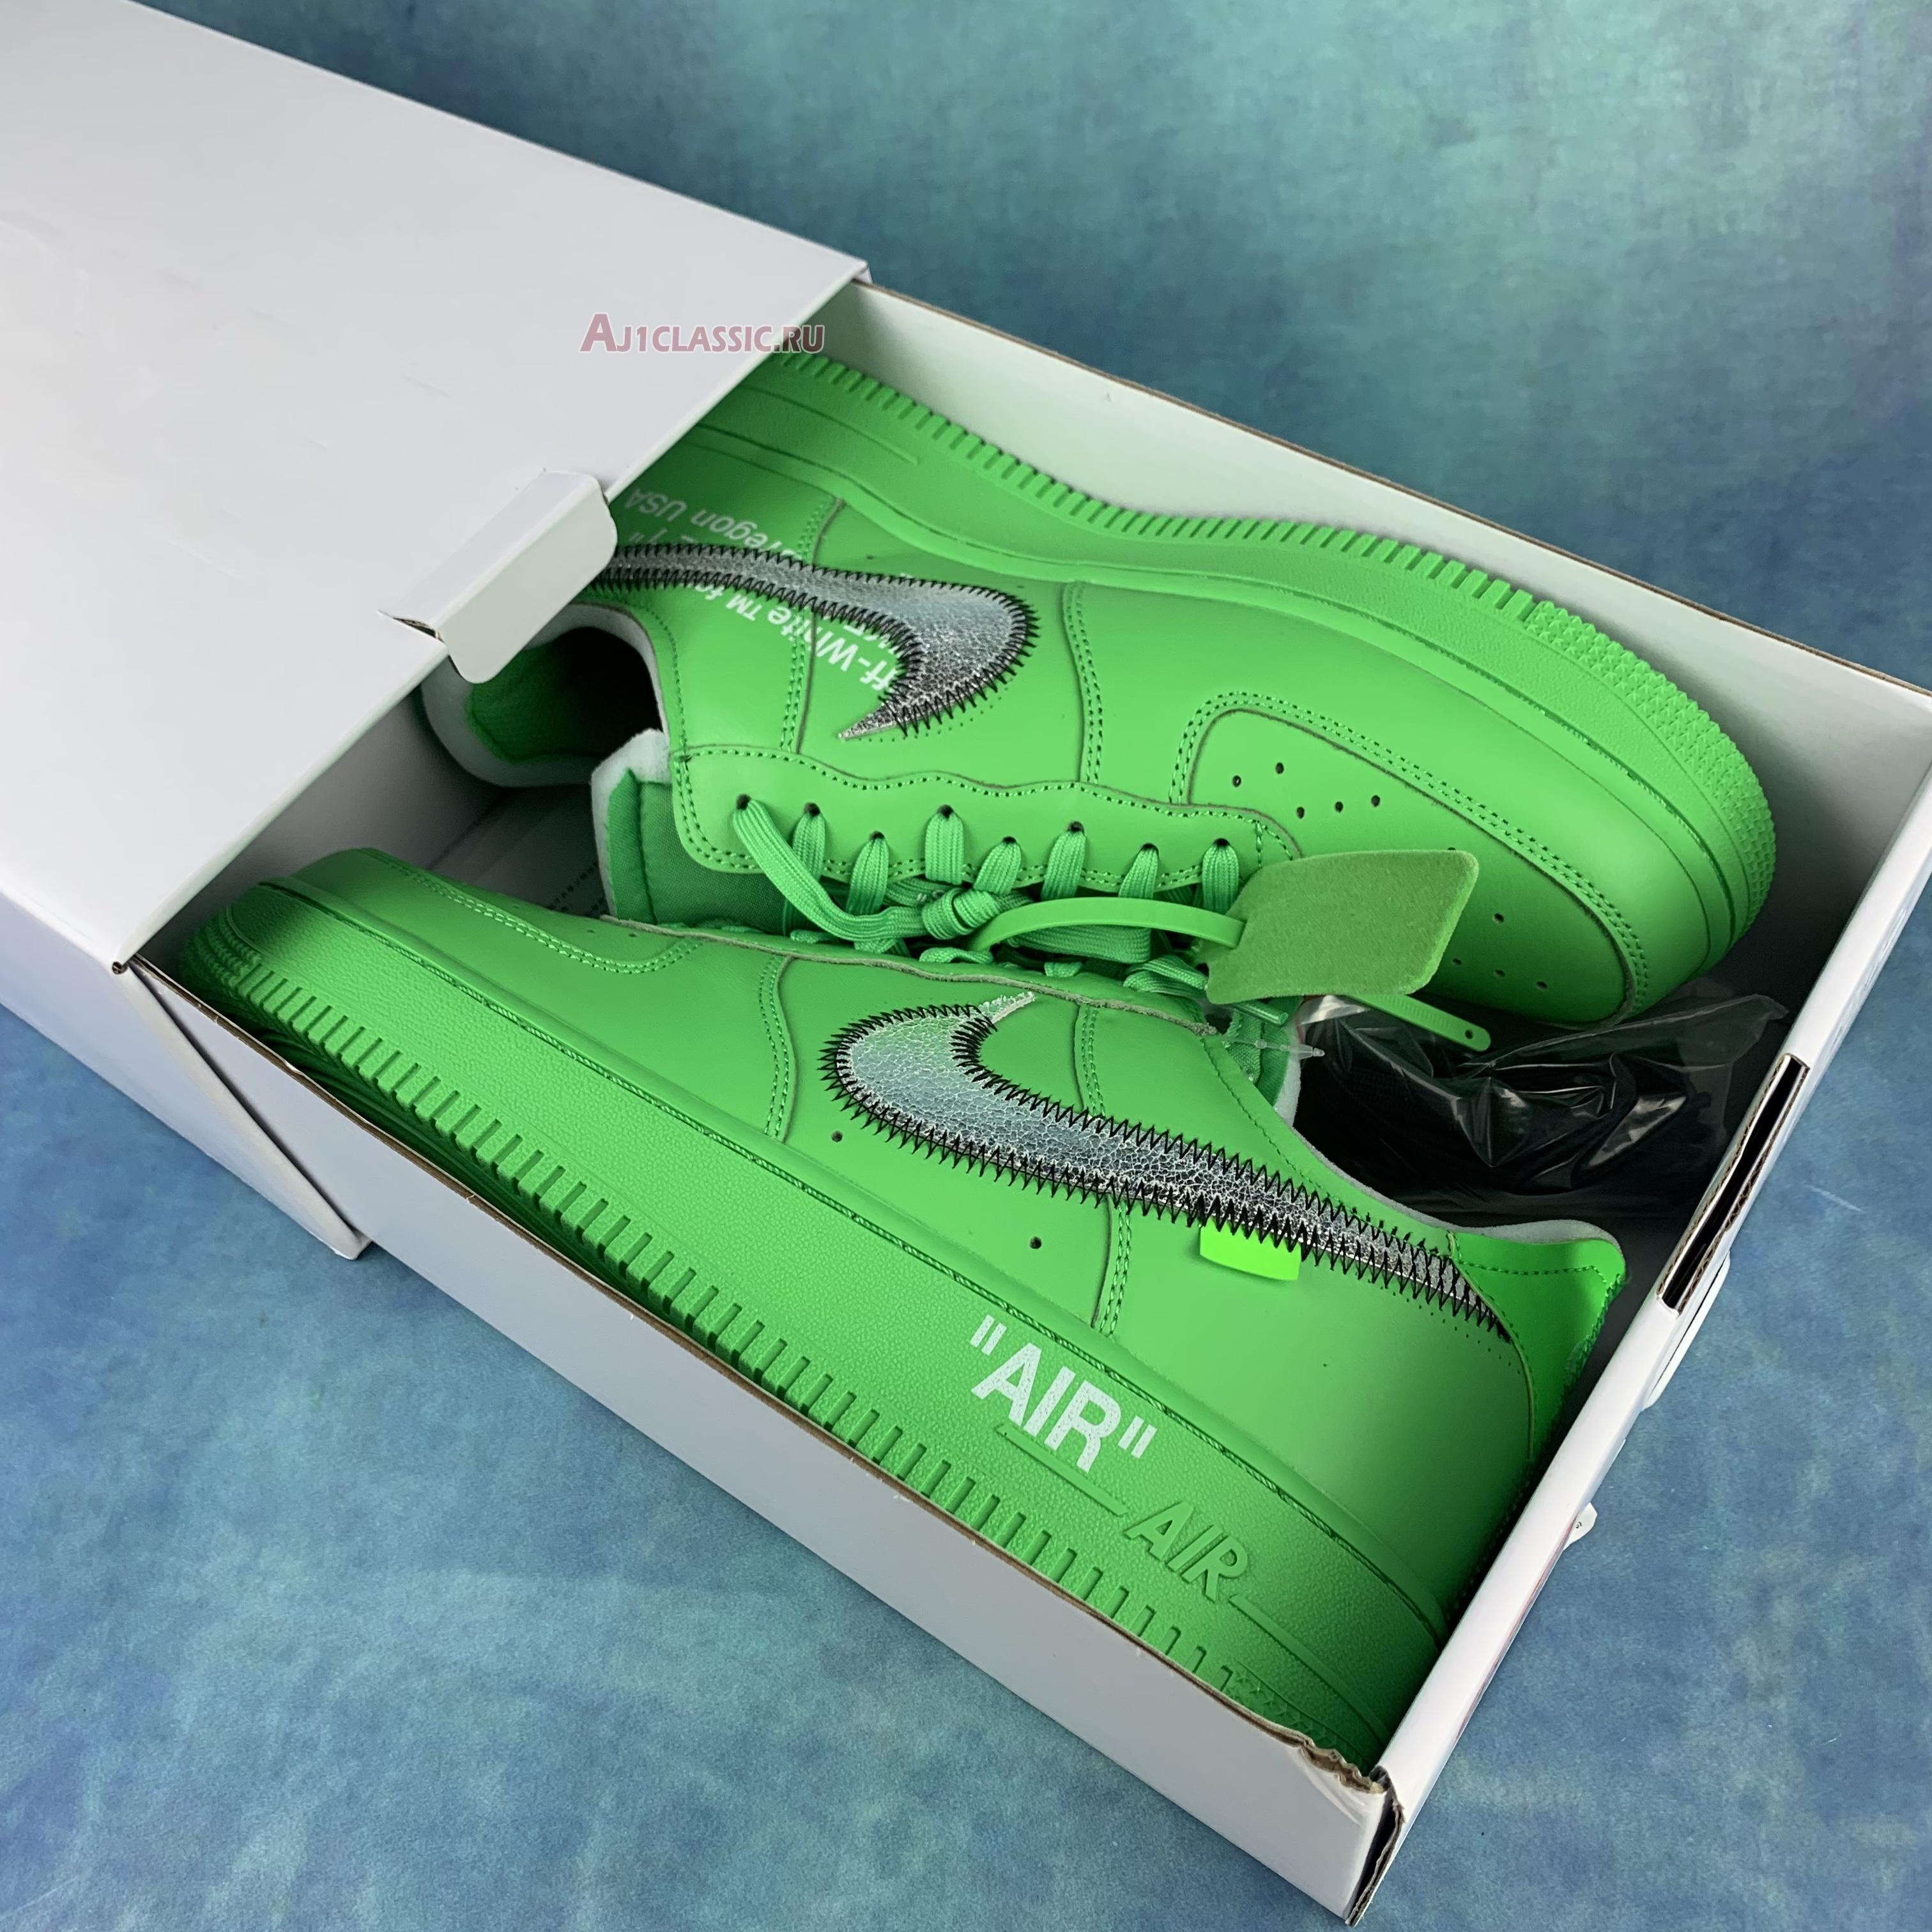 Off-White x Nike Air Force 1 Low Brooklyn DX1419-300 Light Green Spark/Metallic Silver-Light Green Spark Sneakers